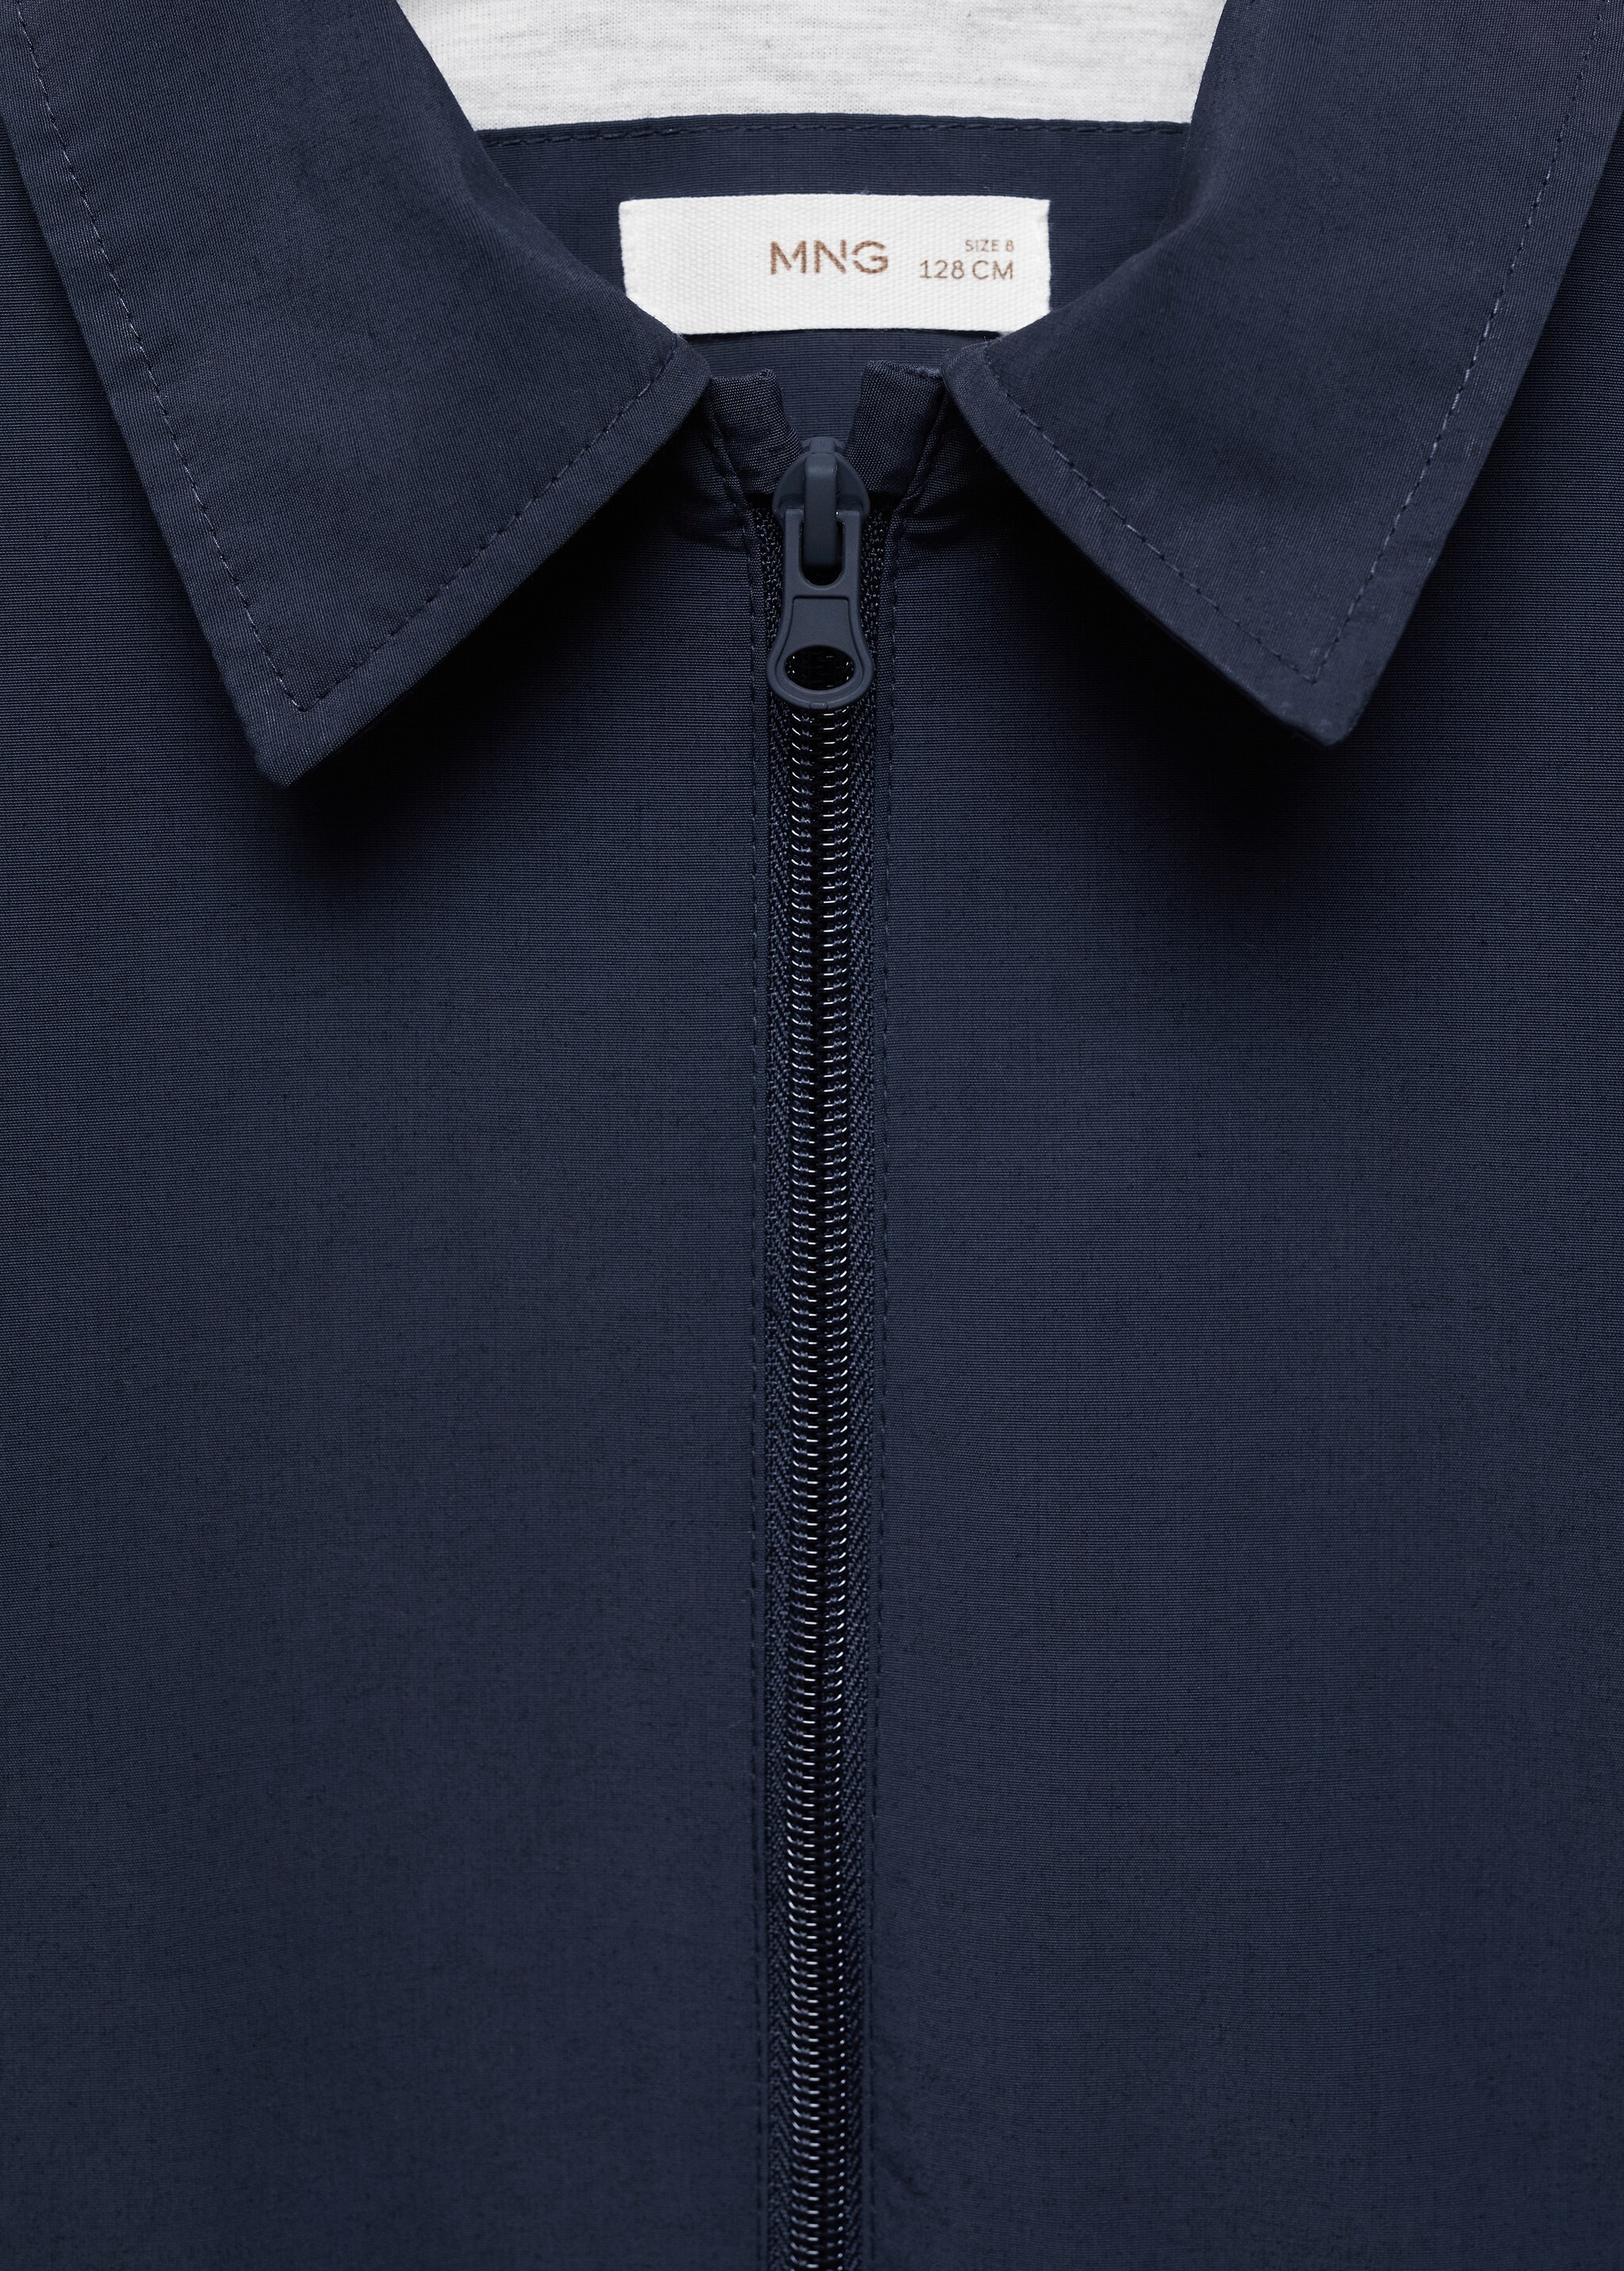 Pocket waterproof parka - Details of the article 8